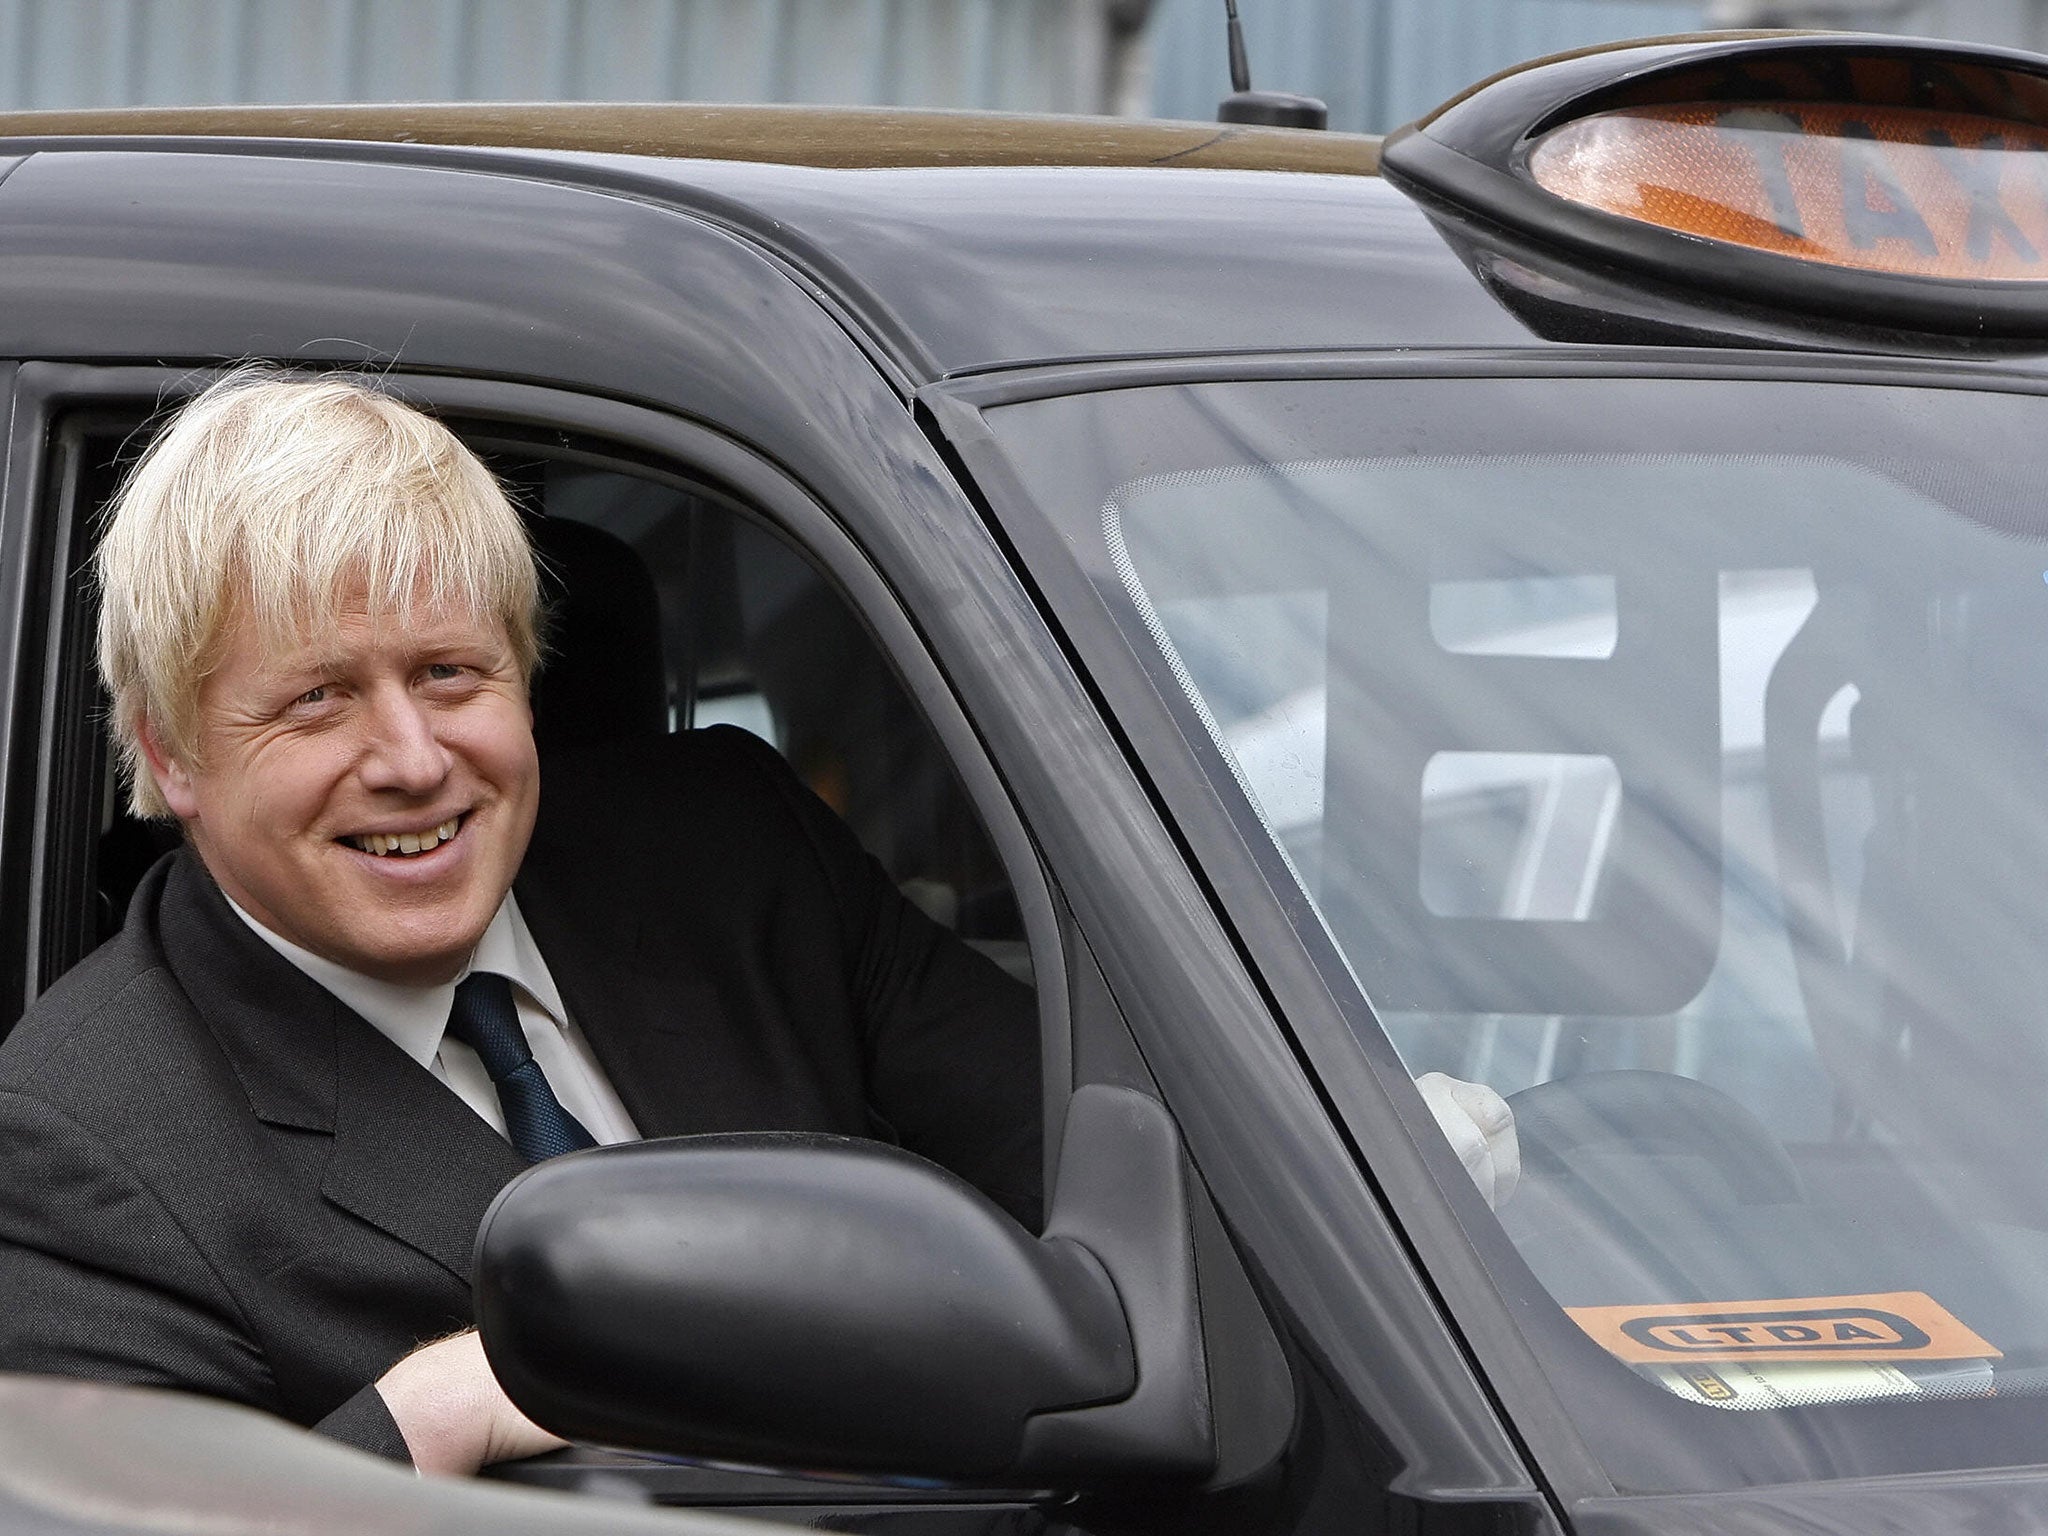 London Mayor Boris Johnson believes the change would boost business for black cab drivers